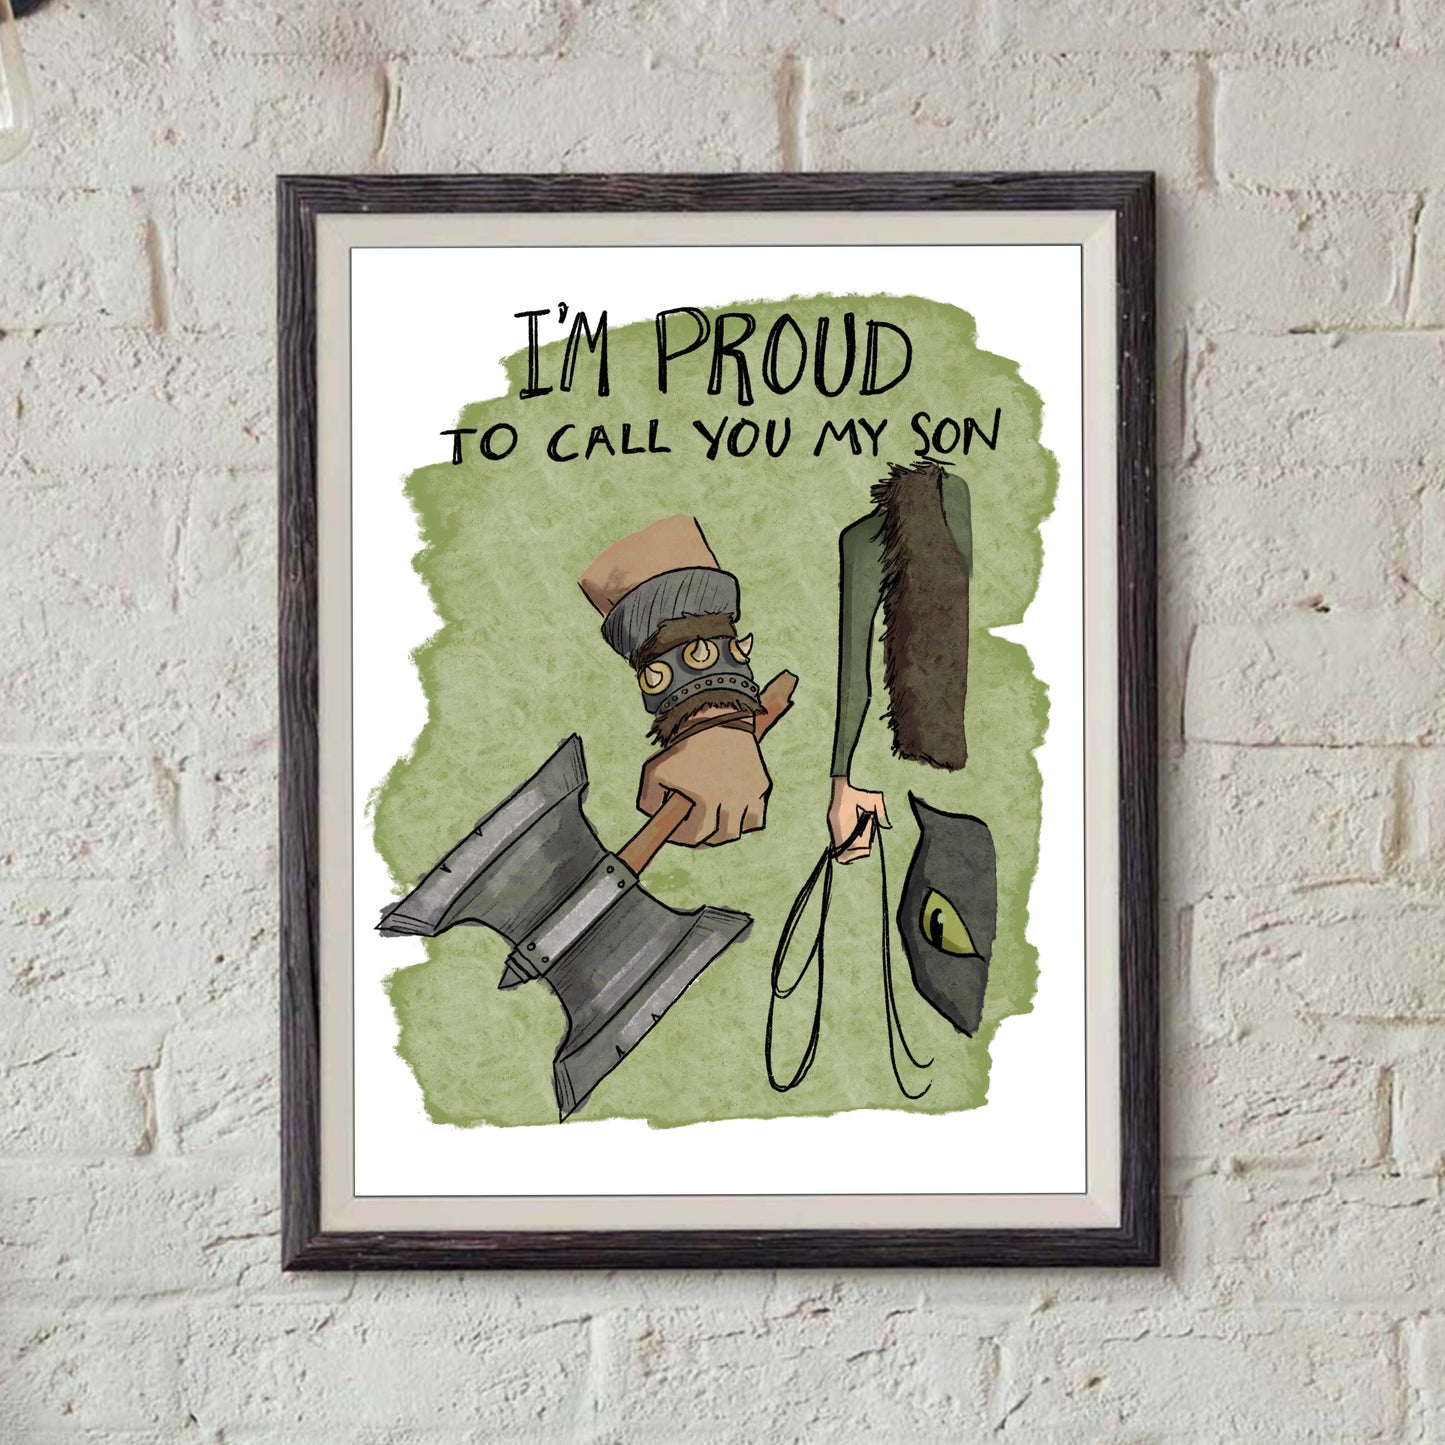 I'm Proud to Call You My Son- Print